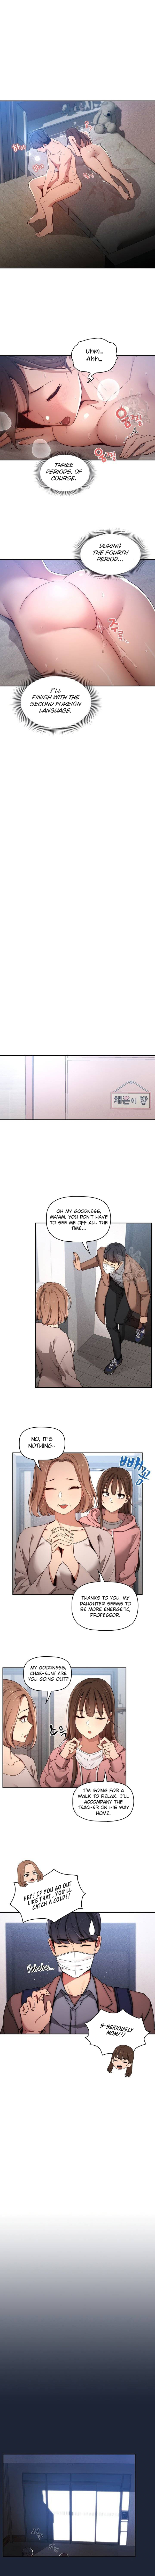 private-tutoring-in-these-difficult-times-chap-32-6